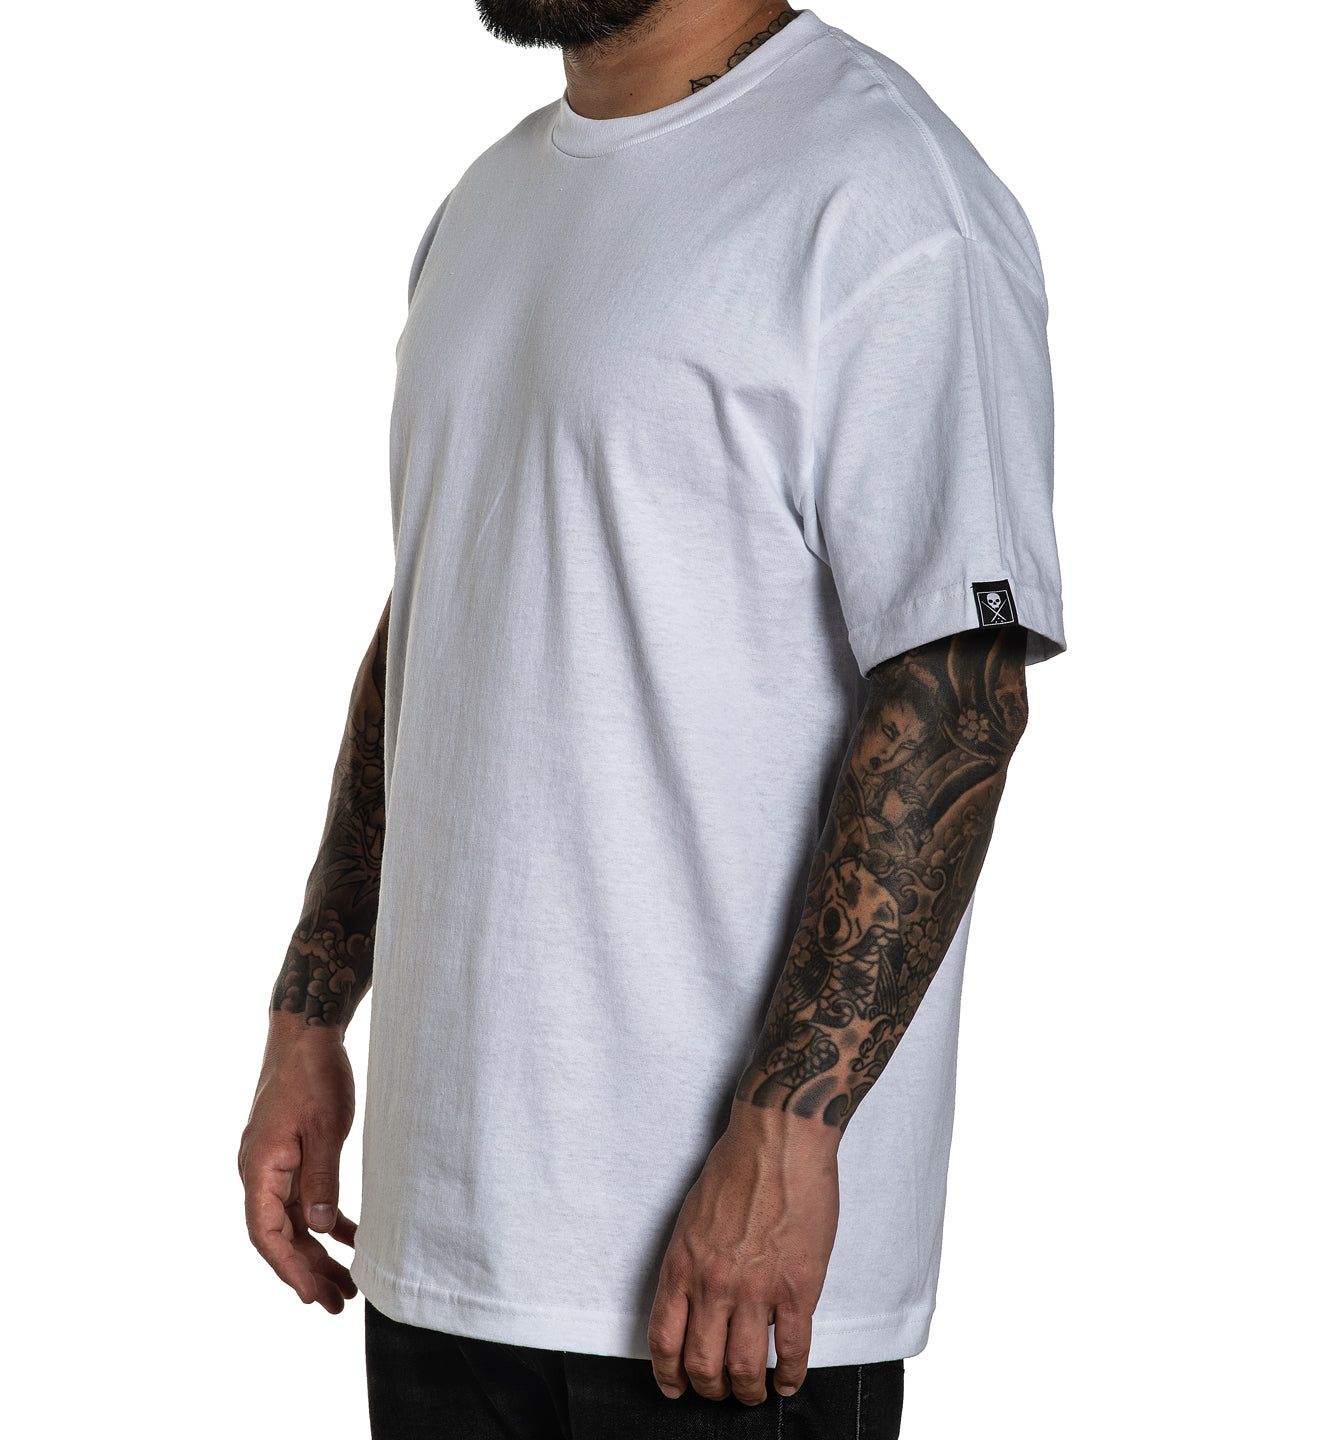 Solid Standard - White - 